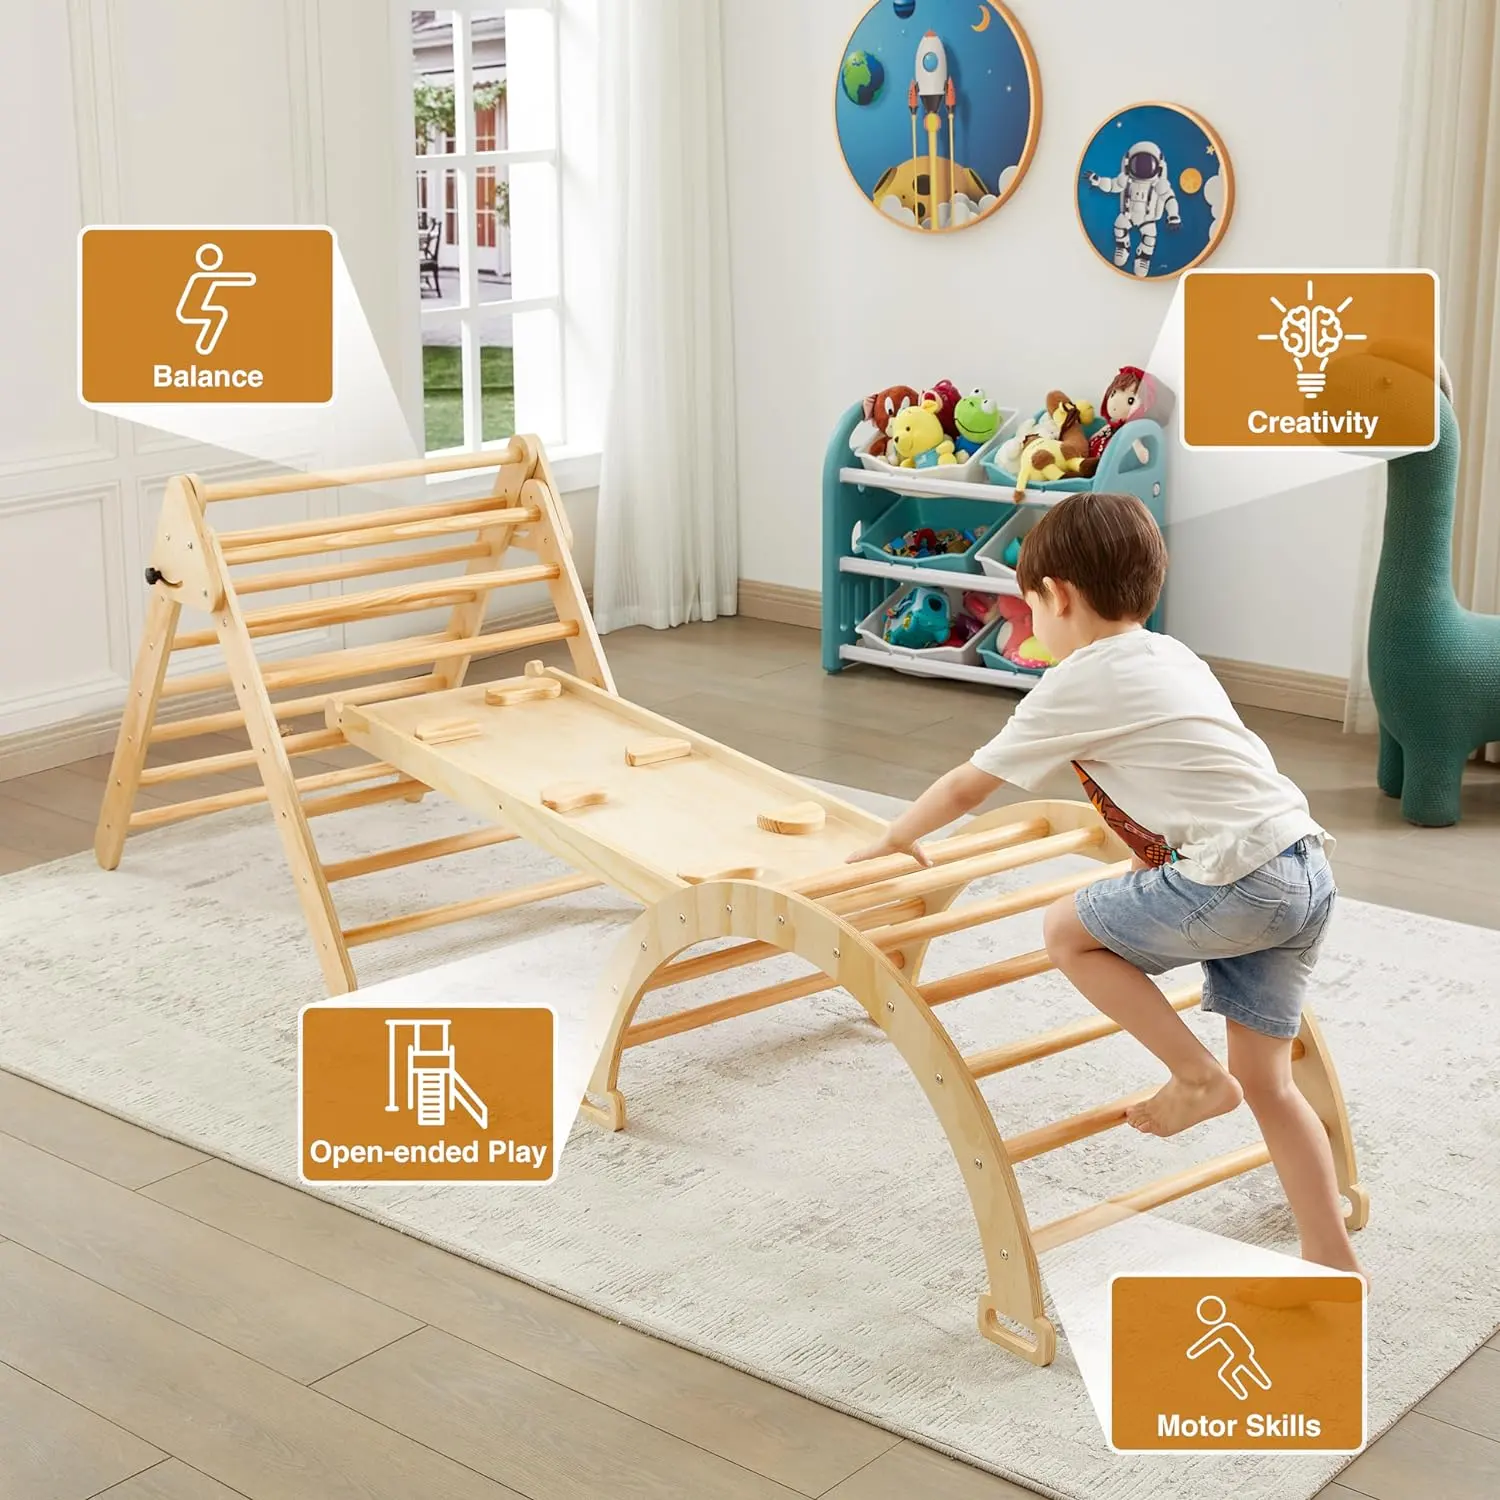 5 in 1 Triangle Gym Montessori Foldable Wooden Climbing Set with Ramp Arch Climber and Rocker for Kids 2-6 Years